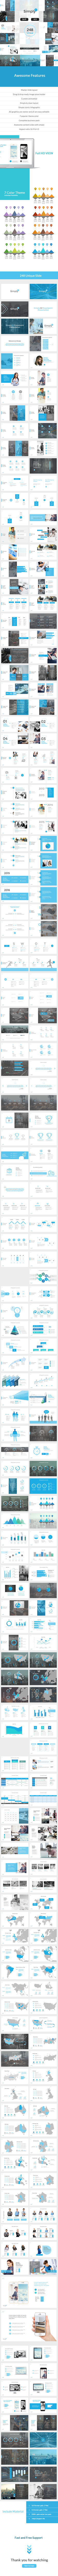 Simply02 Business Presentation Template